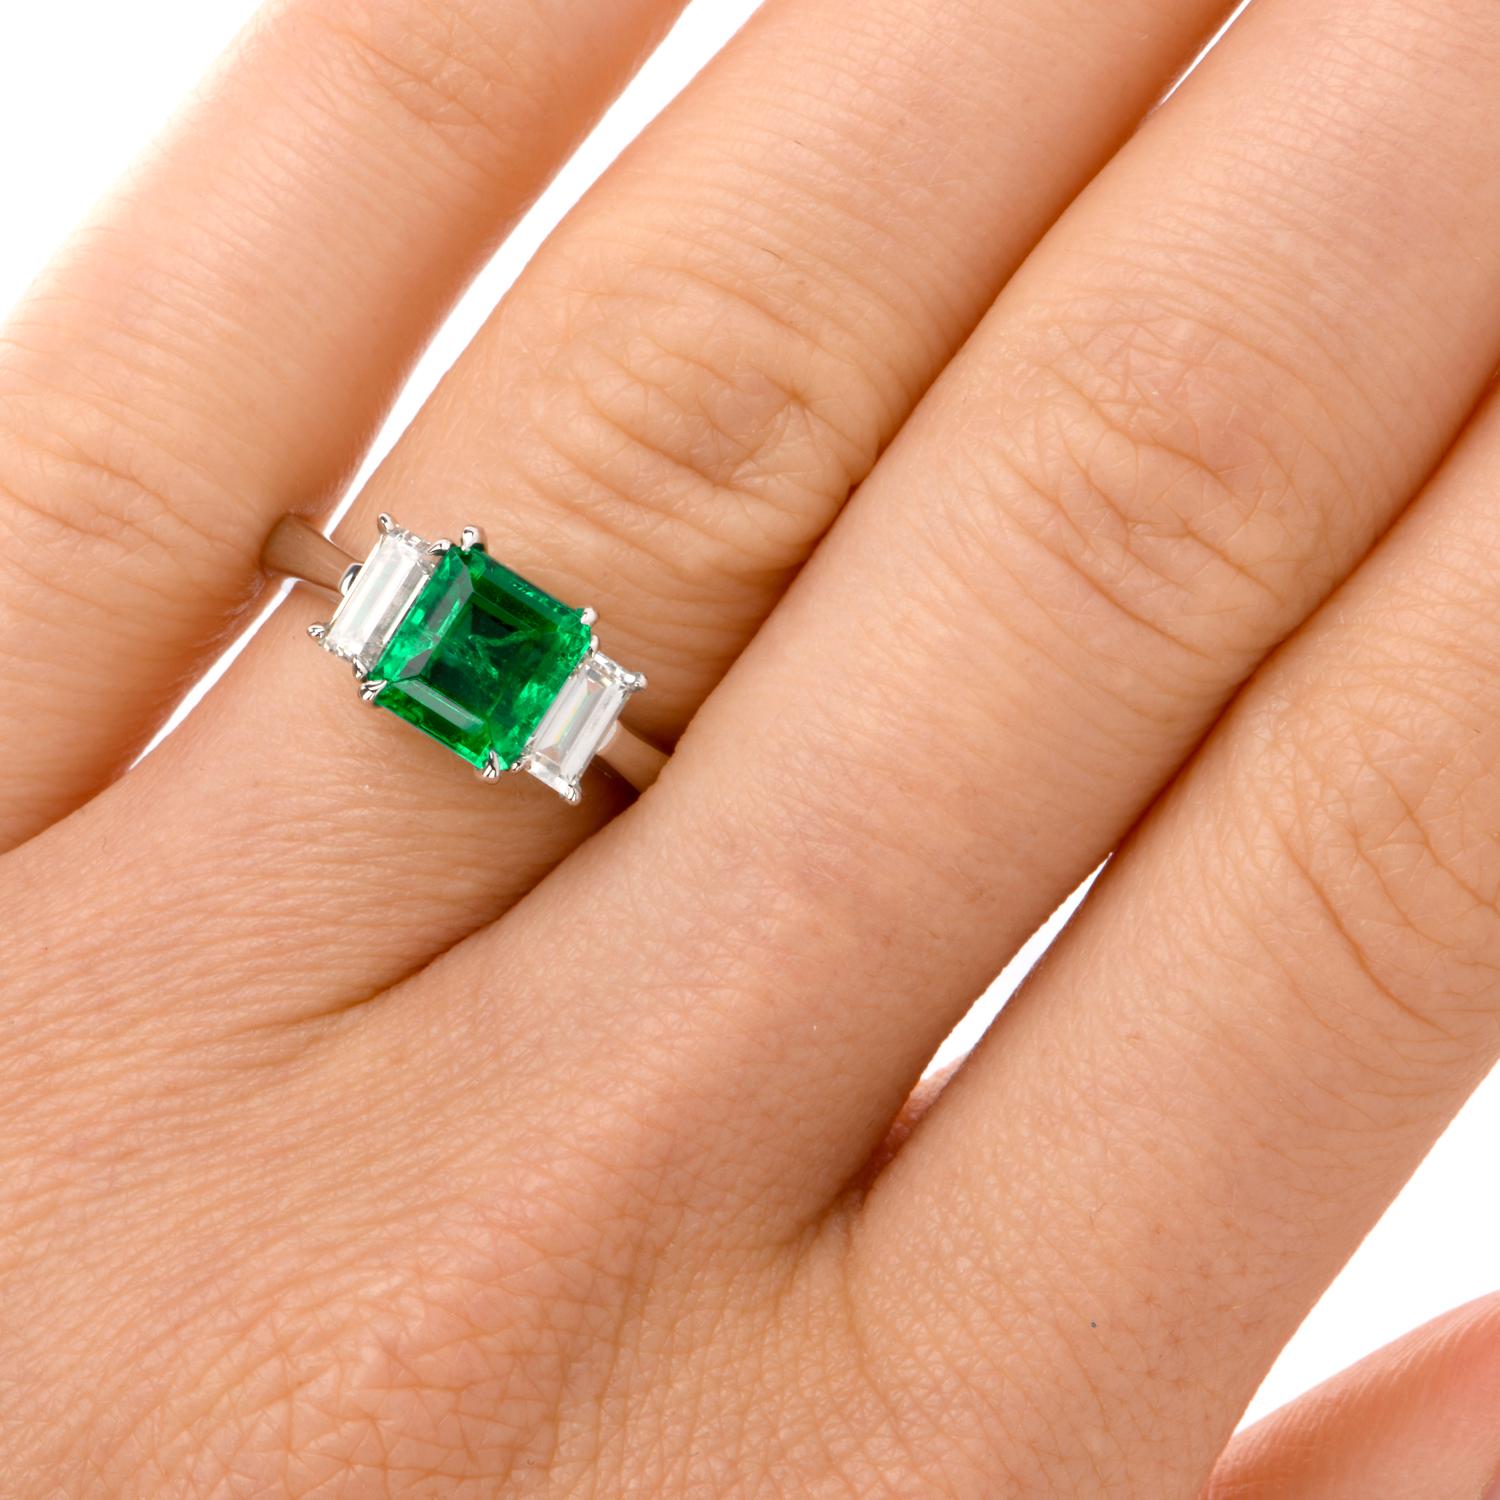 This classic three stone ring is crafted in solid platinum. It exposes at the center avery fine genuine Colombian Emerald, weighing 1.65 cts measuring approx: 7.27 x 6.62 x 4.65mm; and flanked by a pair of genuine baguette diamonds collectively